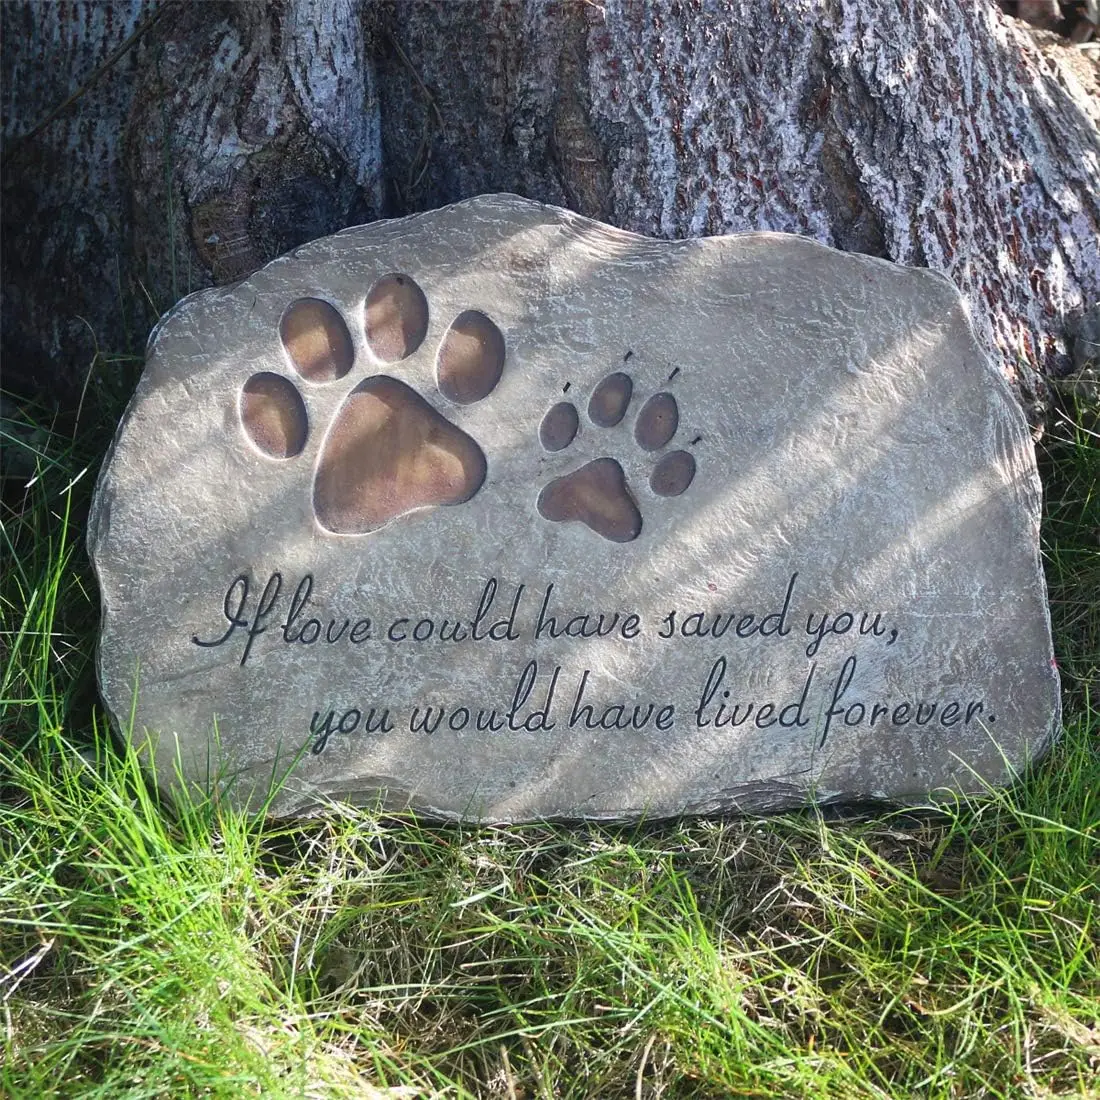 

Paw Prints Dog Pet Memorial Stones, Pet Garden Stone Grave Marker for Dog or Cat, Hand-Painted Pet Memorial Gift Loss Gifts